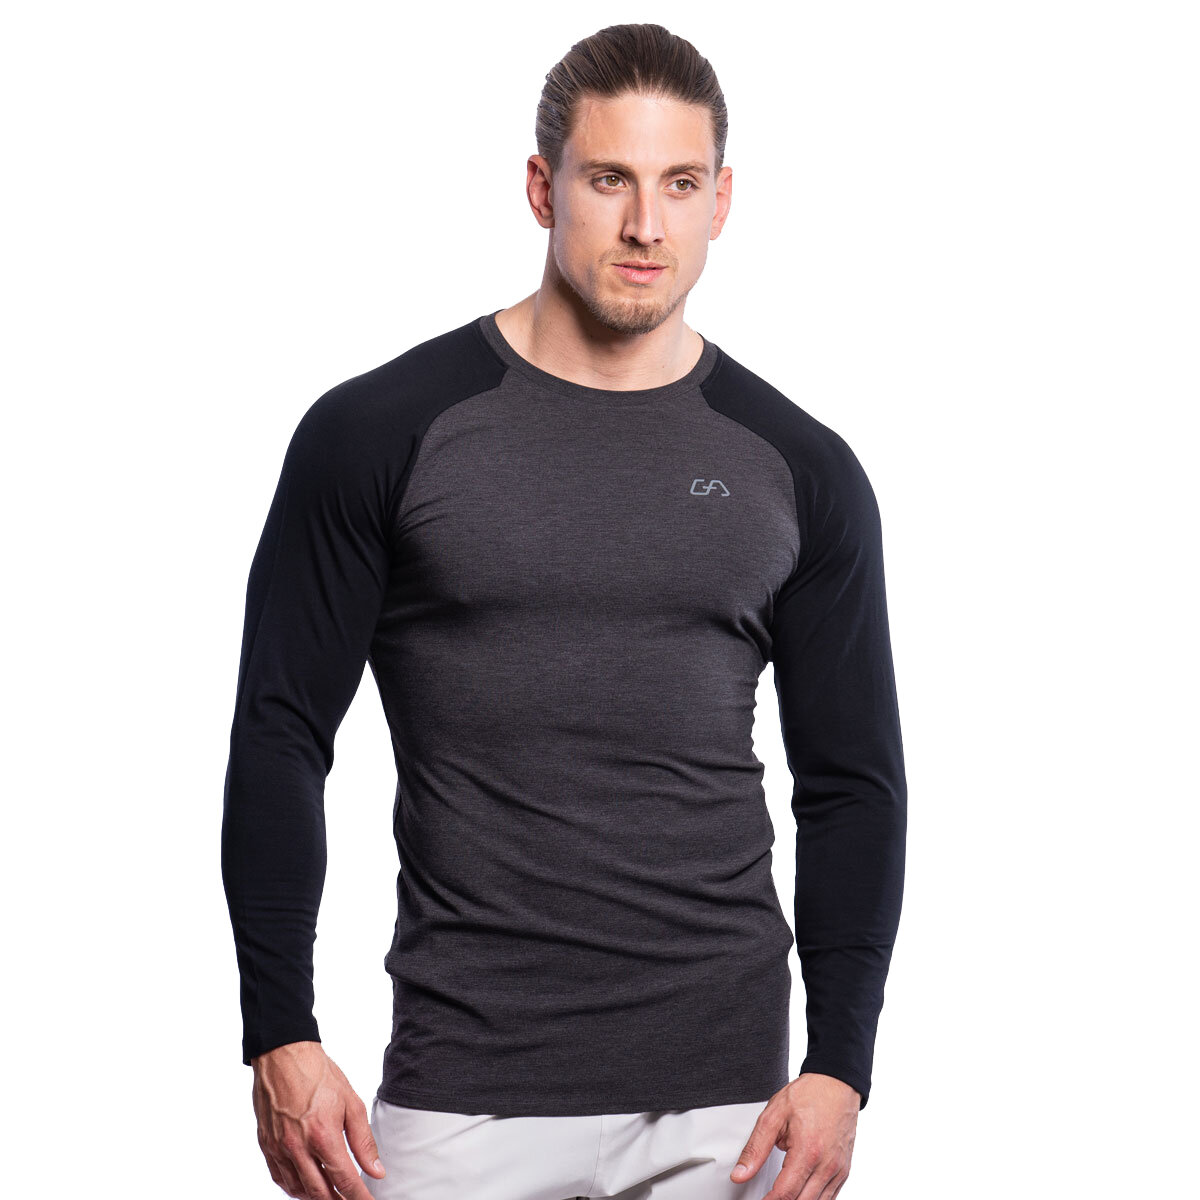 Shop Men's Long Sleeve Black Sports T-Shirt - Stay Cool and